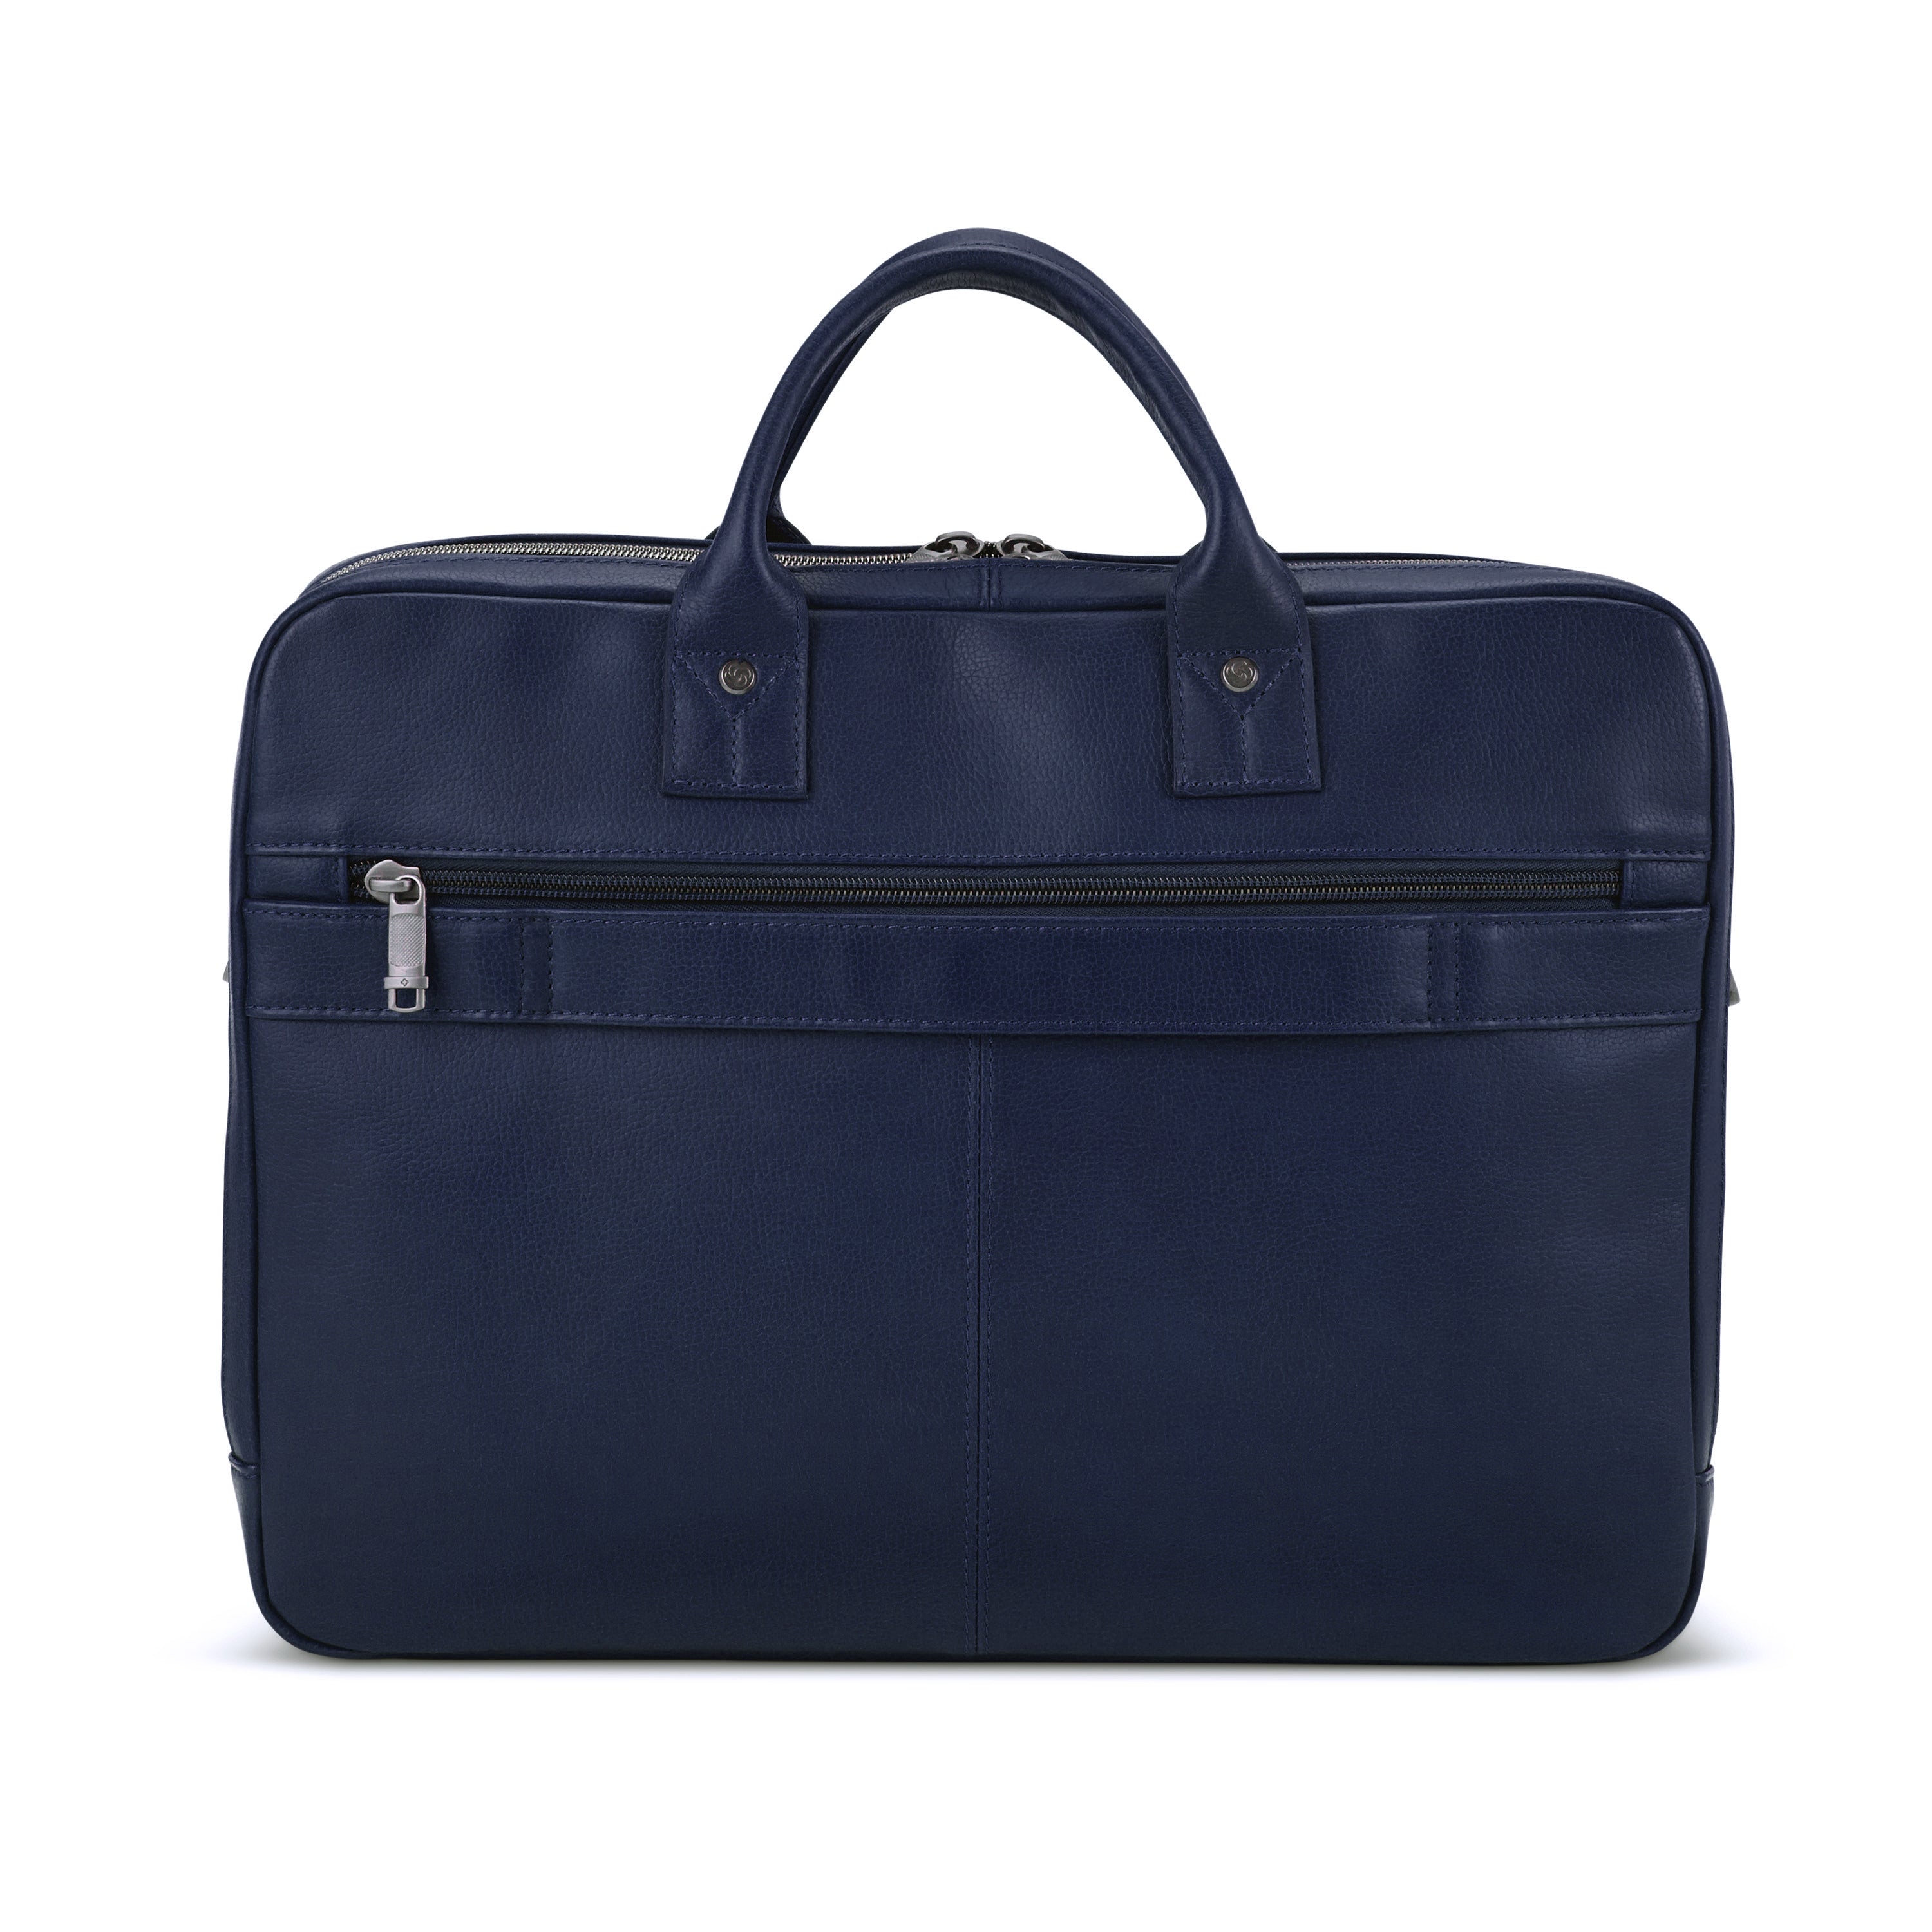 Samsonite Classic Leather 126039 Top Loader Briefcase - Navy-4